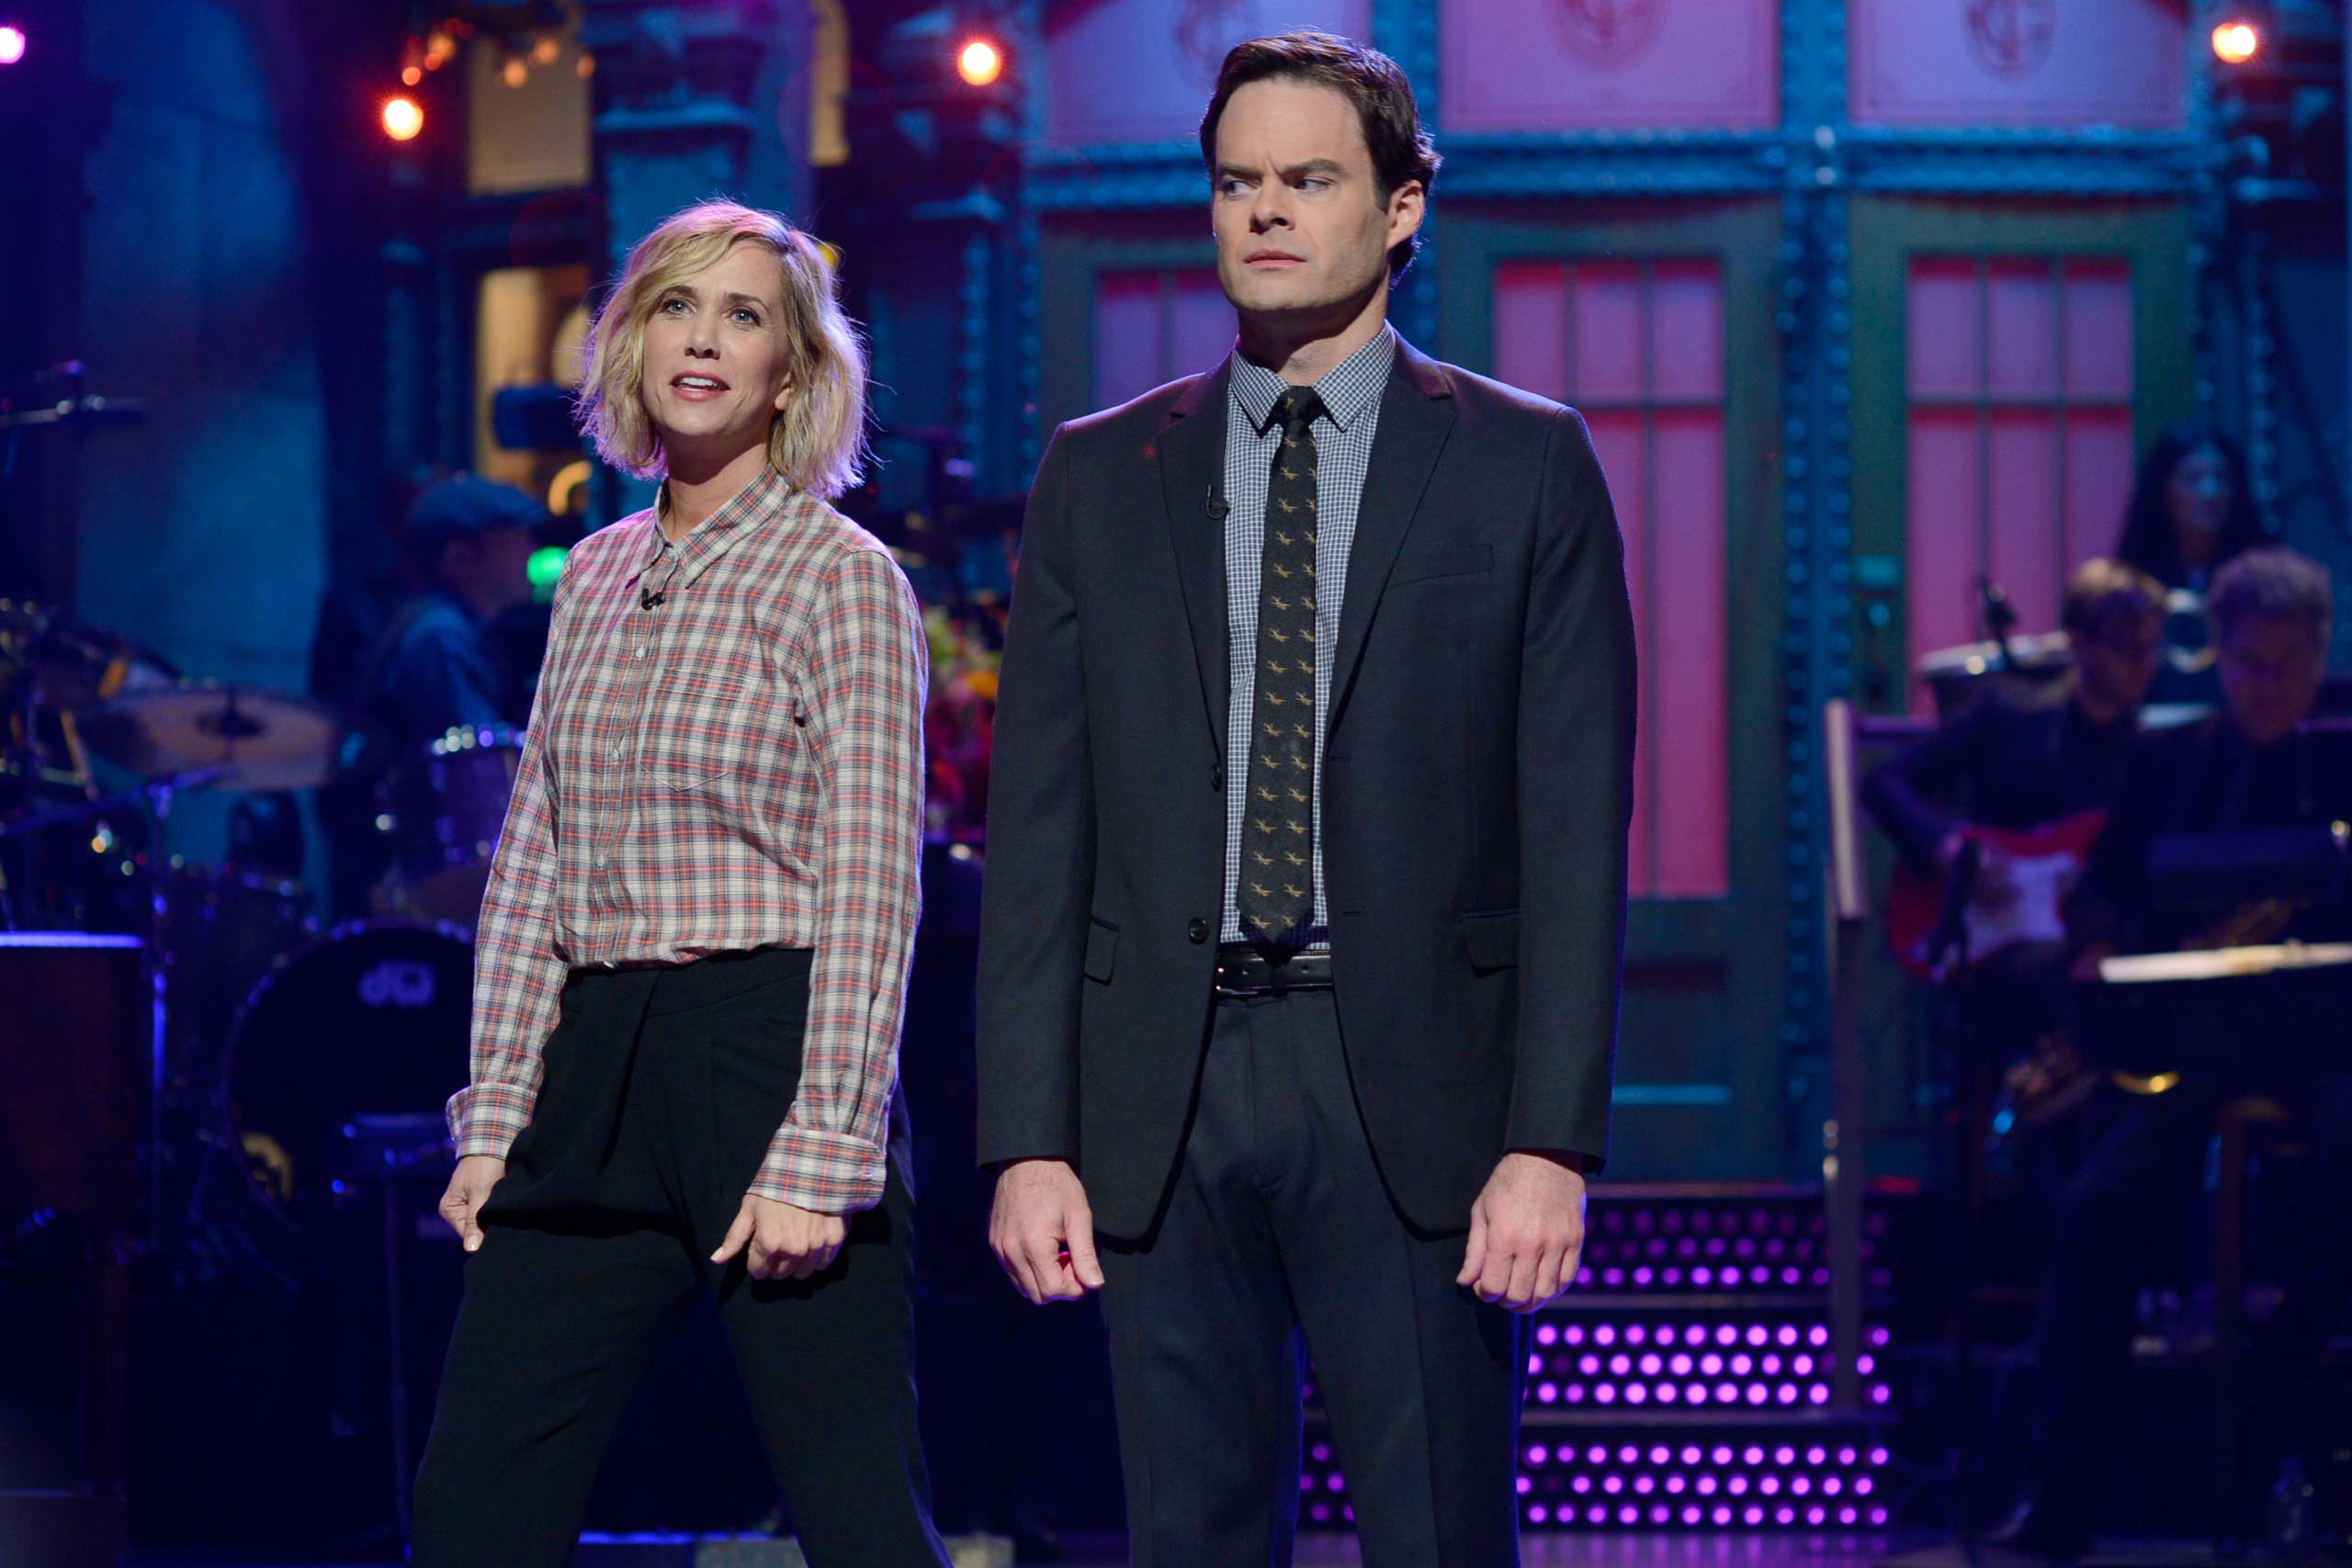 Kristen Wiig and Bill Hader on Saturday Night Live on Oct. 11, 2014. (Dana Edelson—NBC/Getty Images)